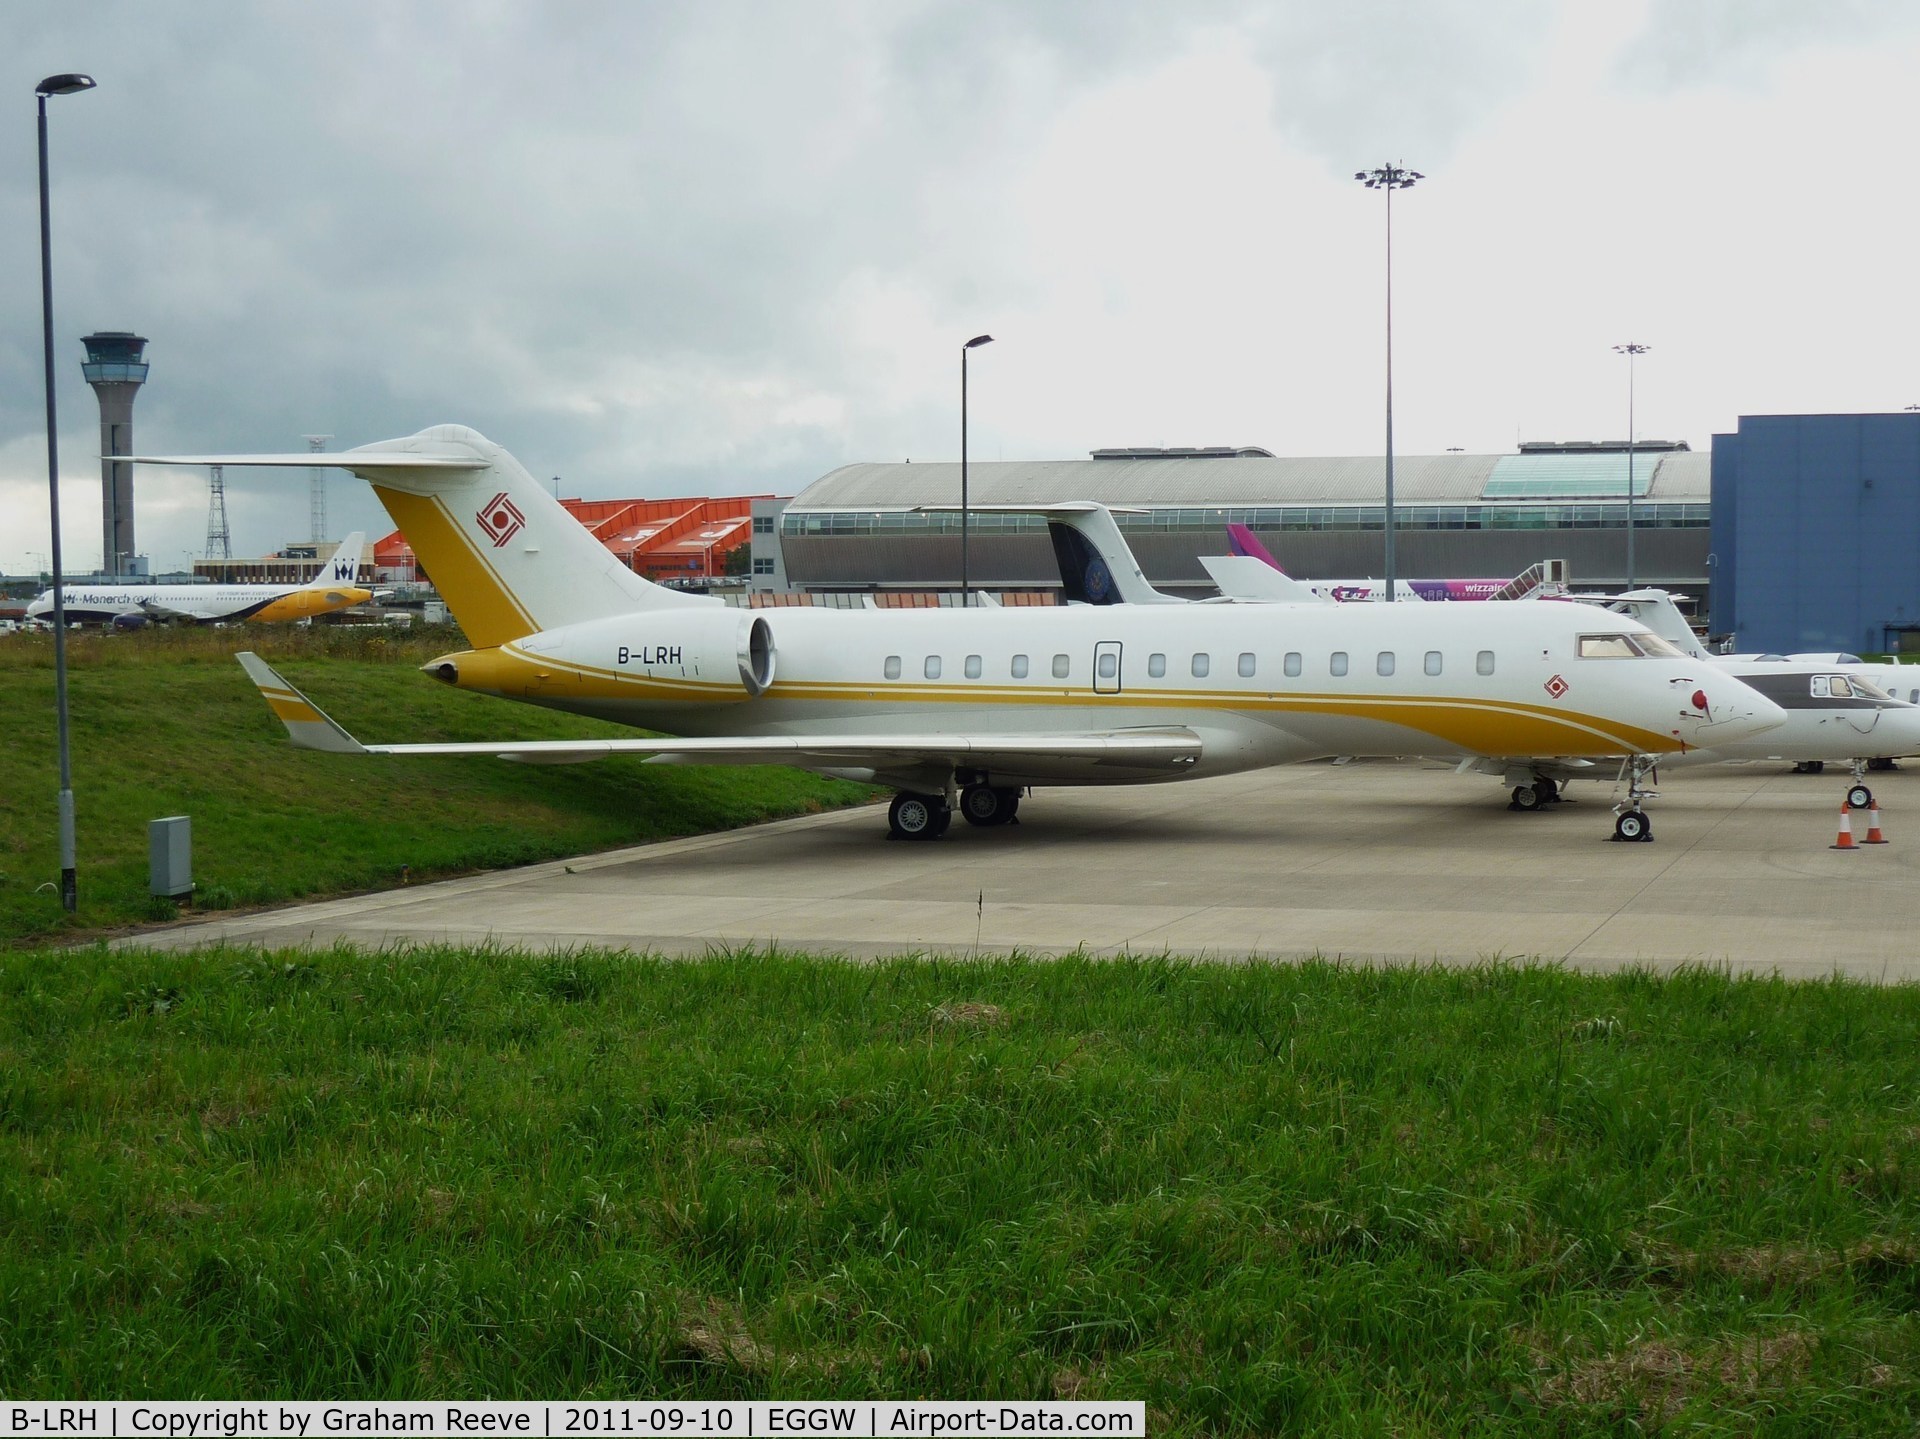 B-LRH, 2007 Bombardier BD-700-1A11 Global 5000 C/N 9241, Parked at Luton.